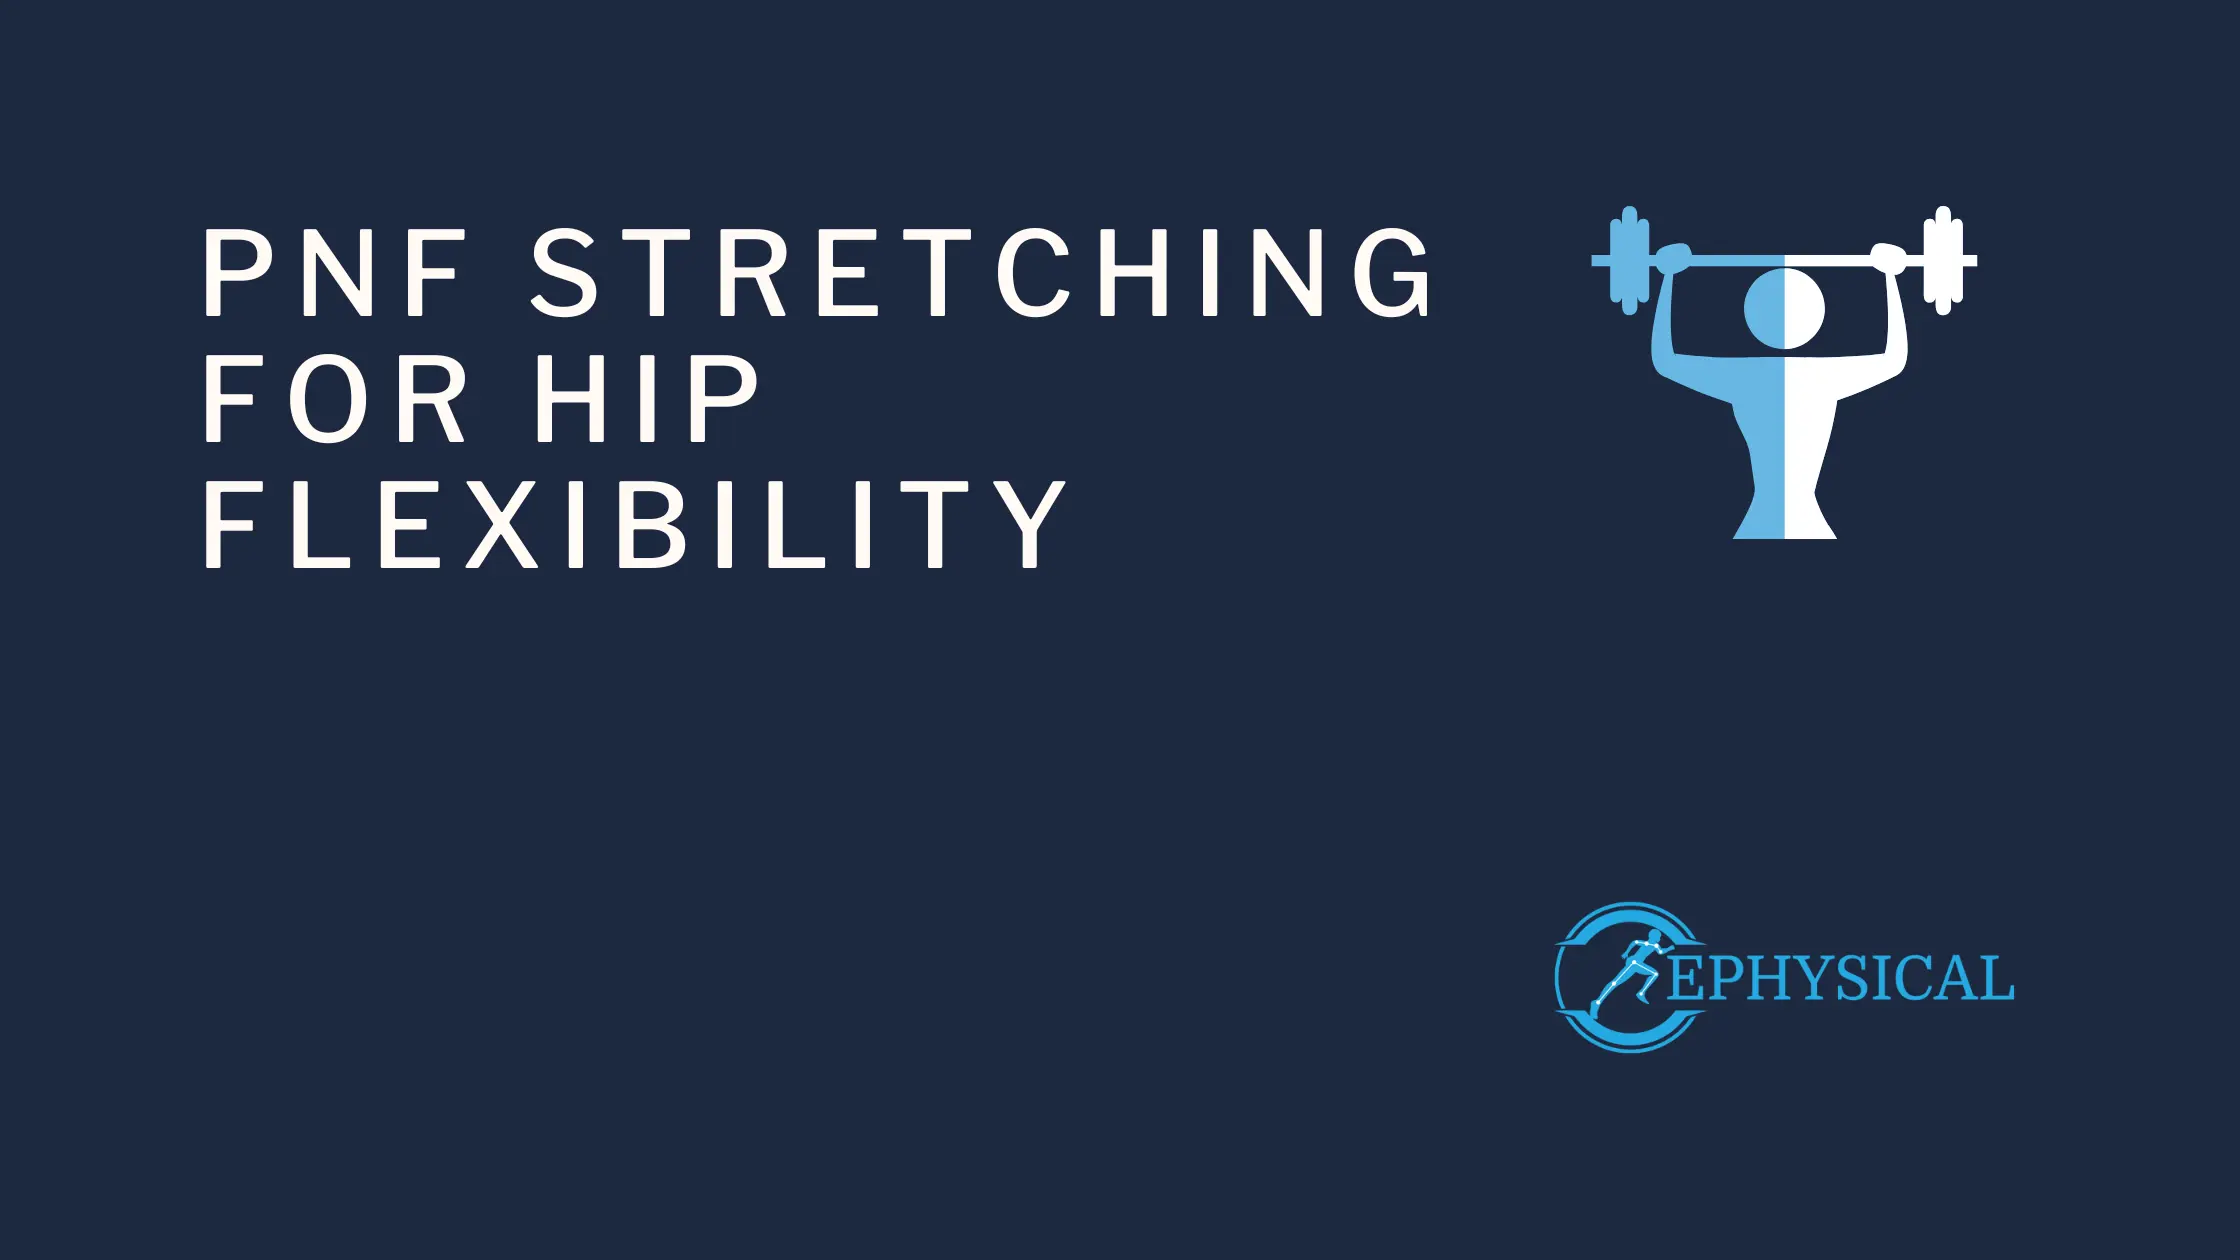 pnf stretching for hip flexibility